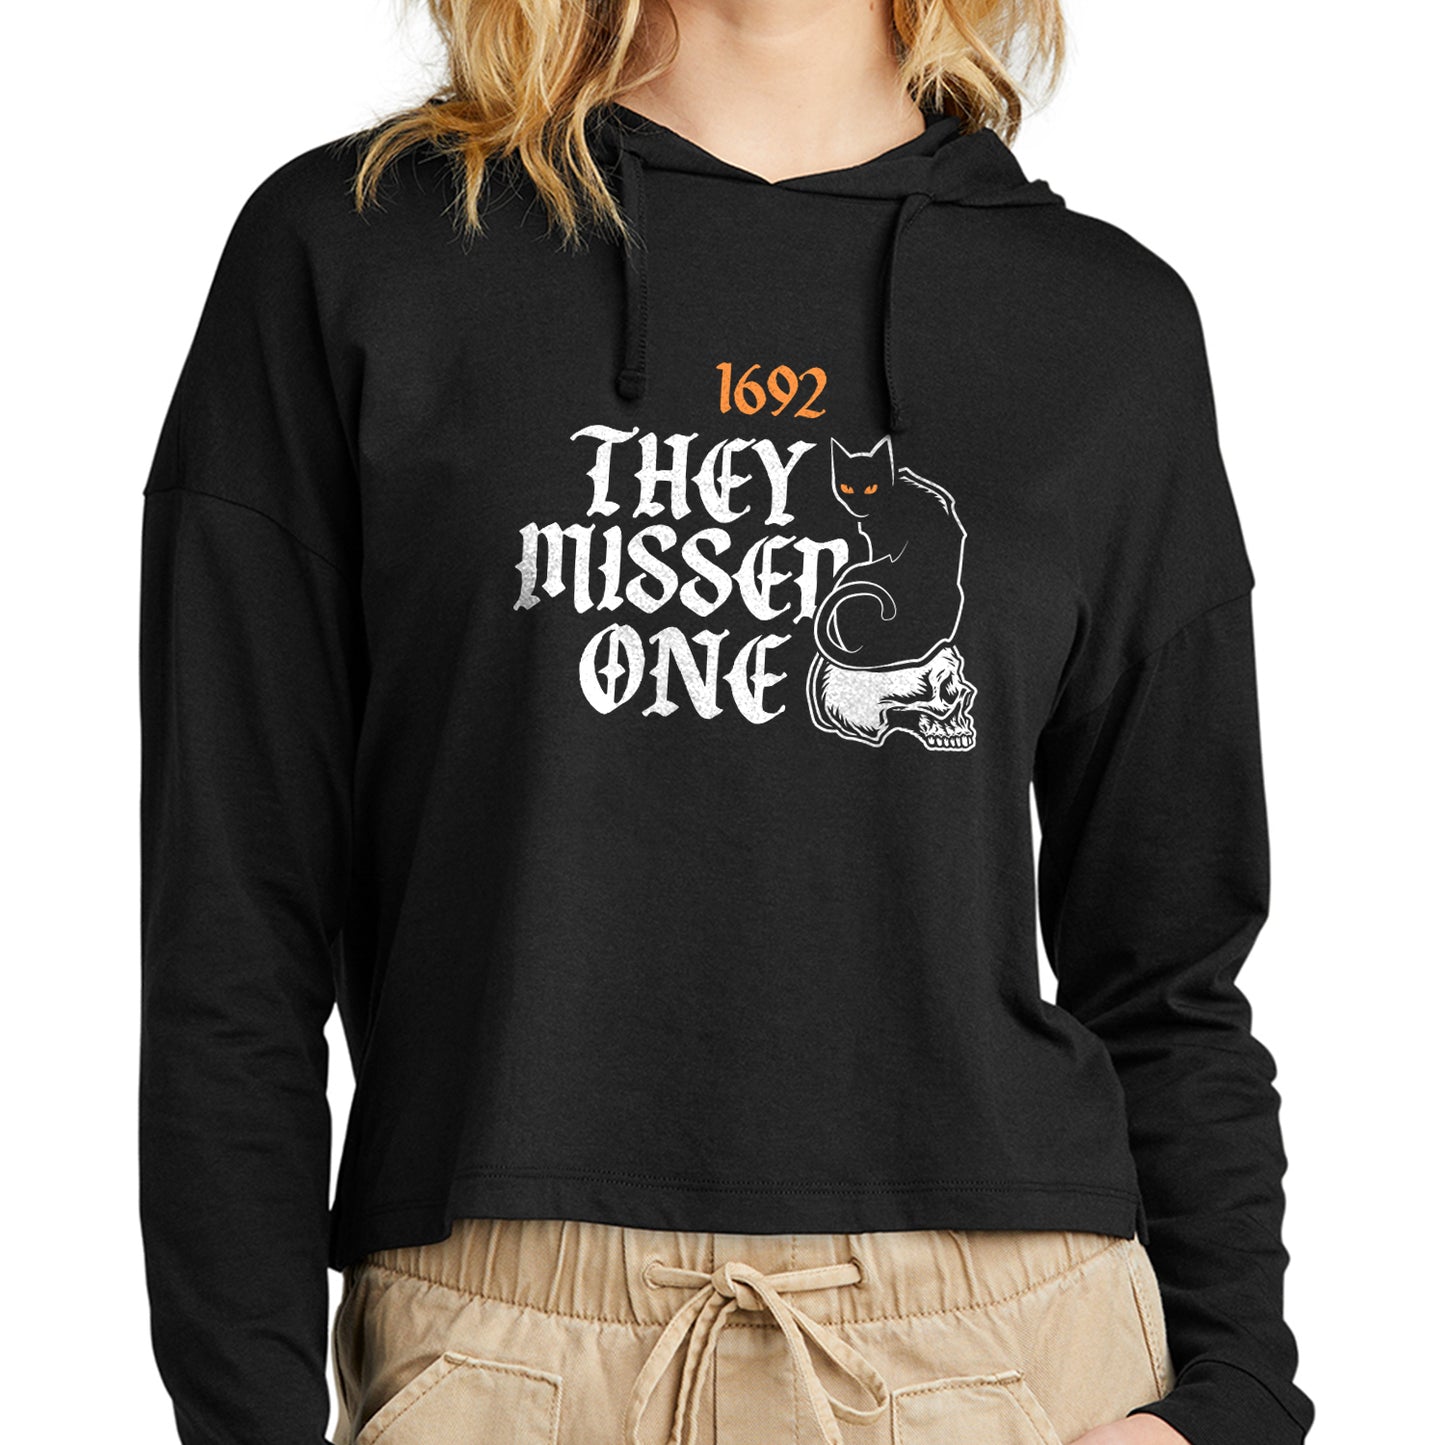 A model wearing a black cropped hoodie, against a white background. On the hoodie is orange and white text saying "1692: they missed one." Next to the text is an embroidered black cat with orange eyes, sitting on a white skull.